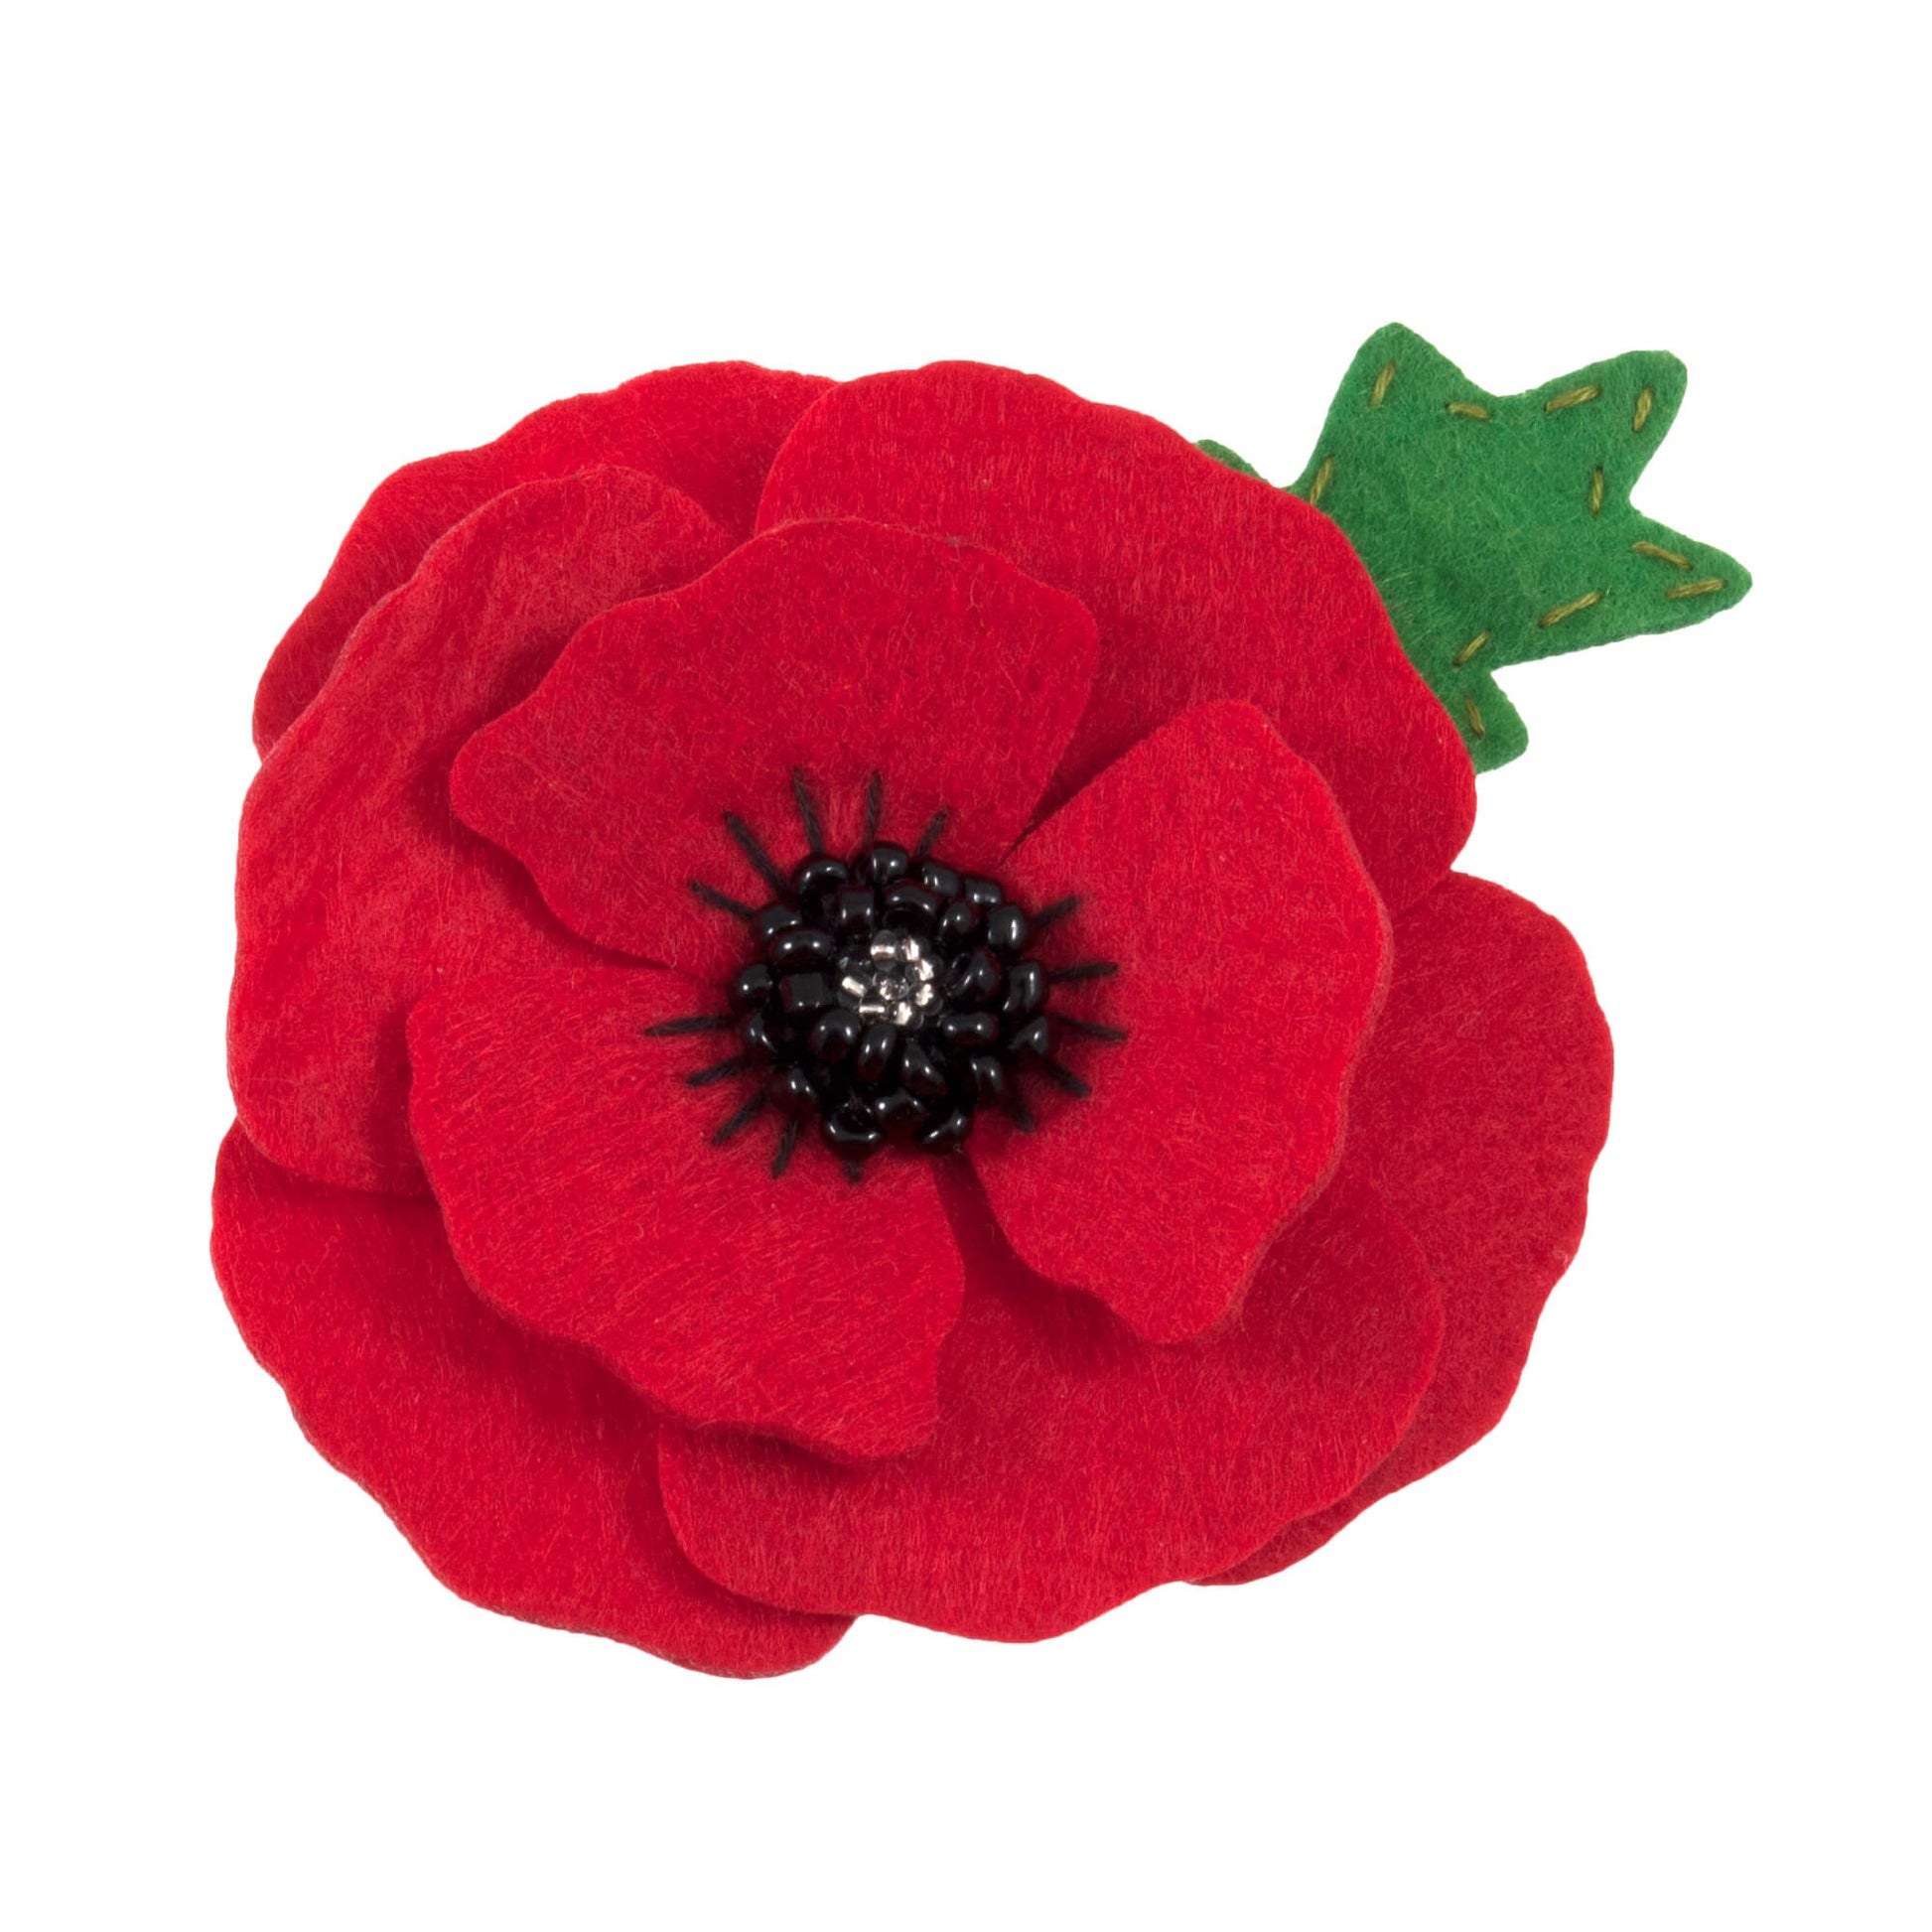  The image shows a red felt poppy with a green leaf on a white background.